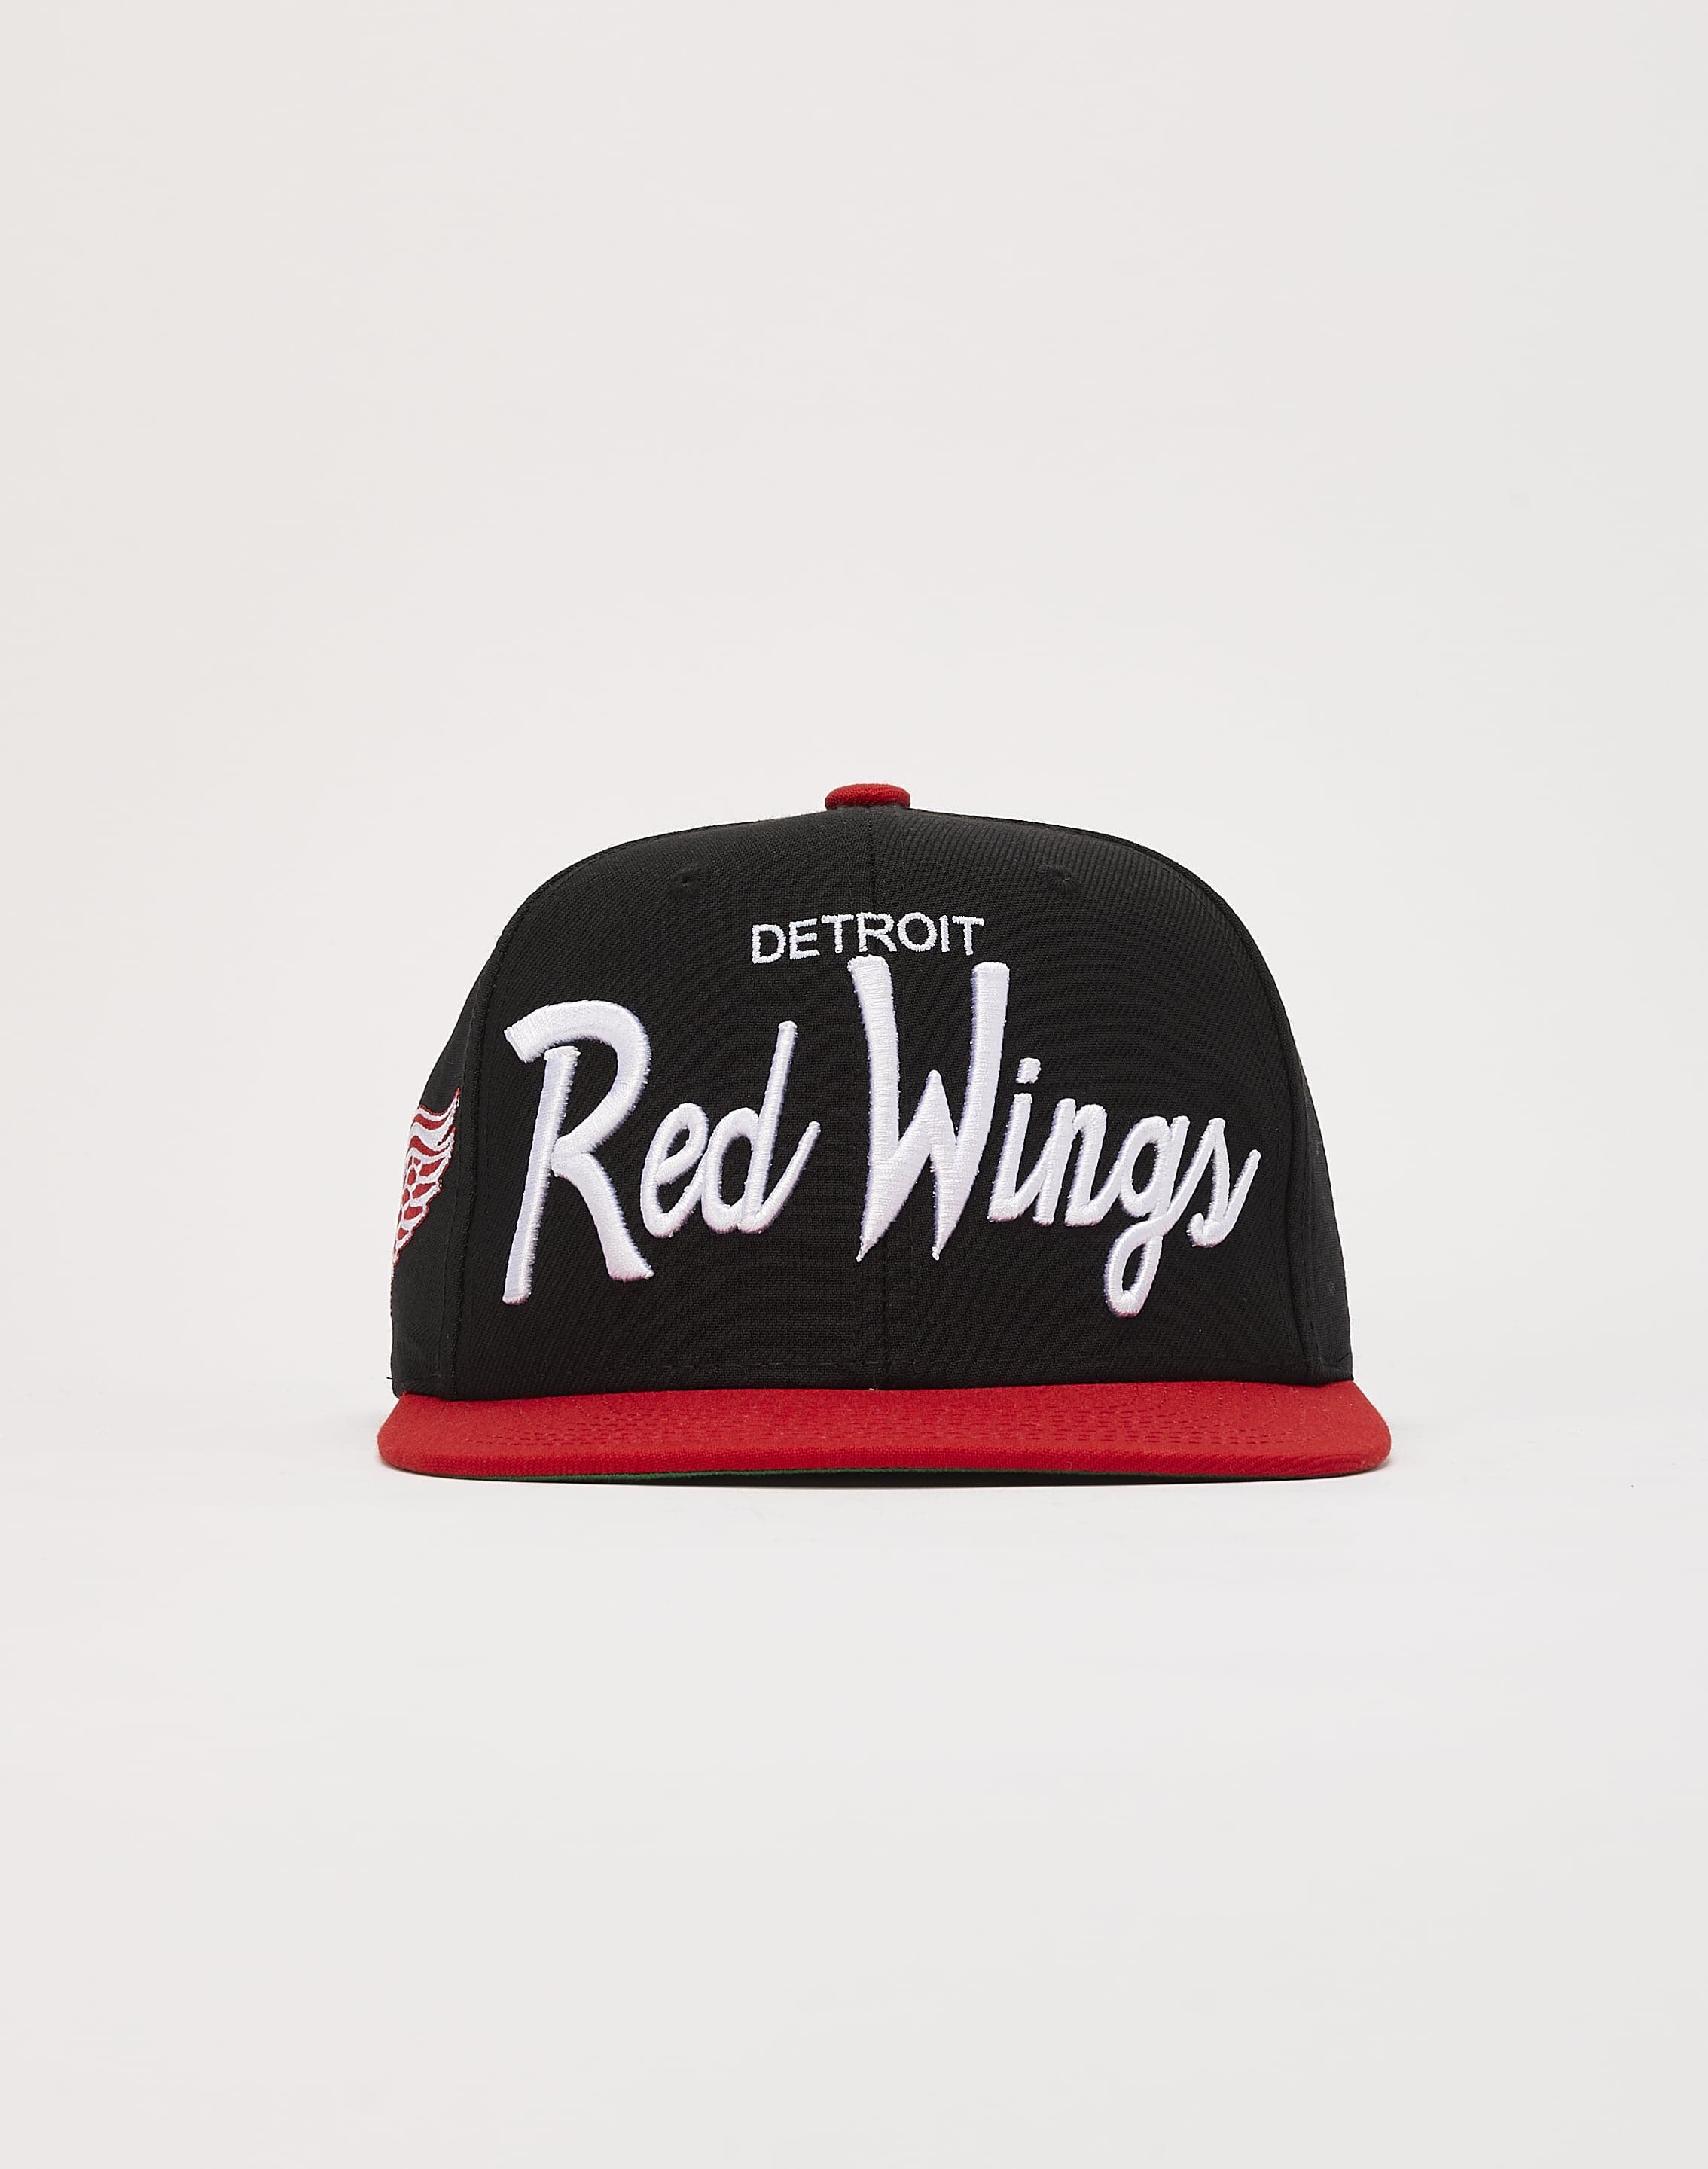 Men's Mitchell & Ness Cream/Red Detroit Red Wings Vintage Snapback Hat